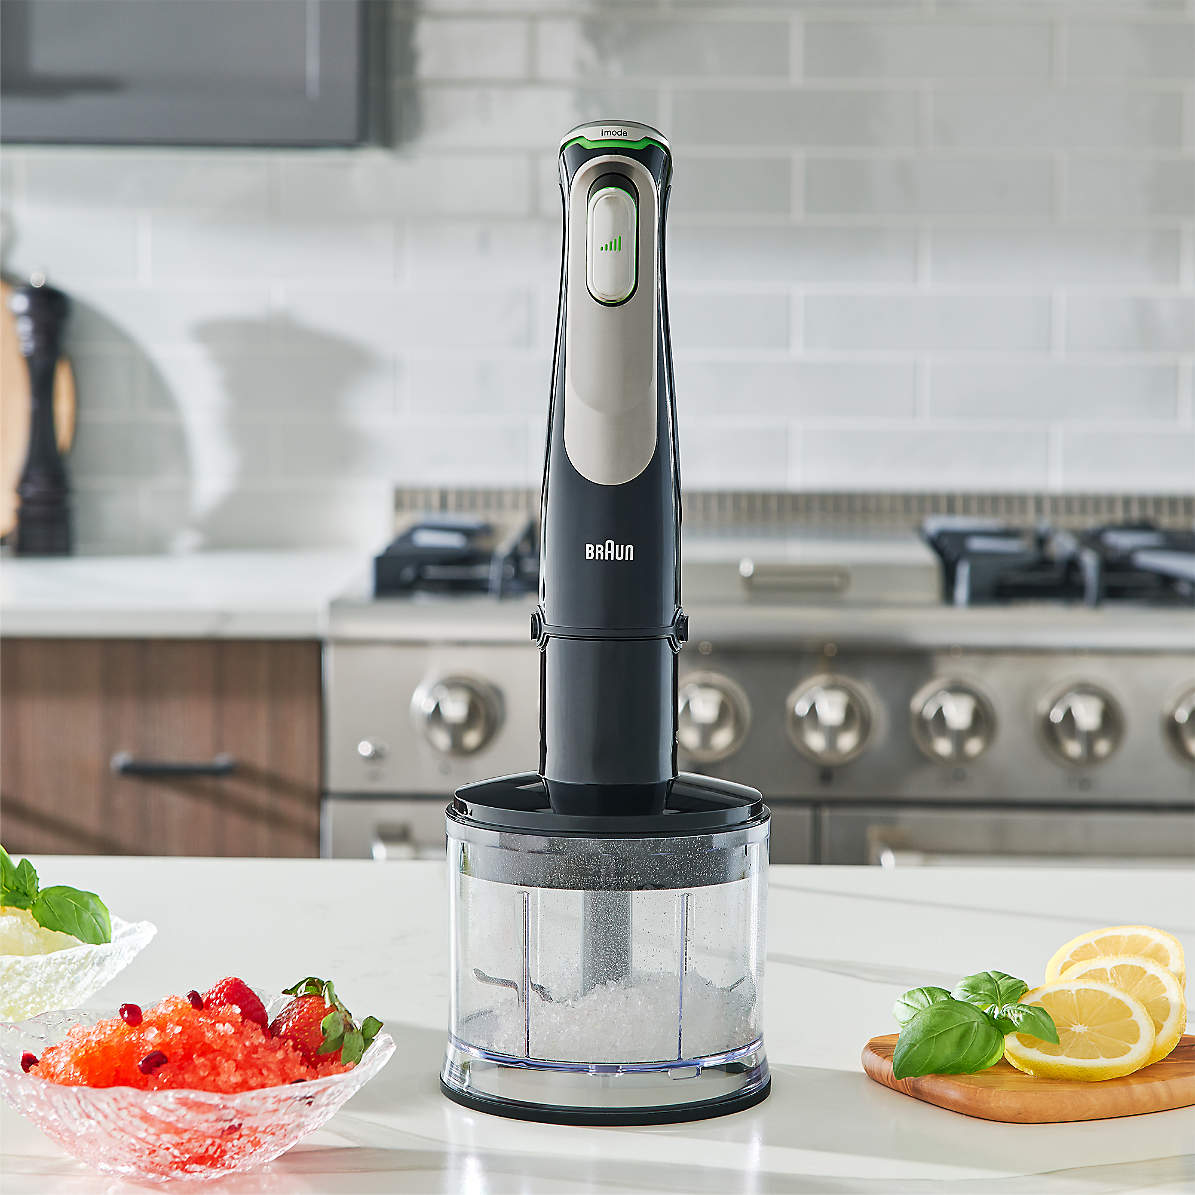 Braun multiquick 9 hand blender review: Blades to puree, shred, whisk and  more